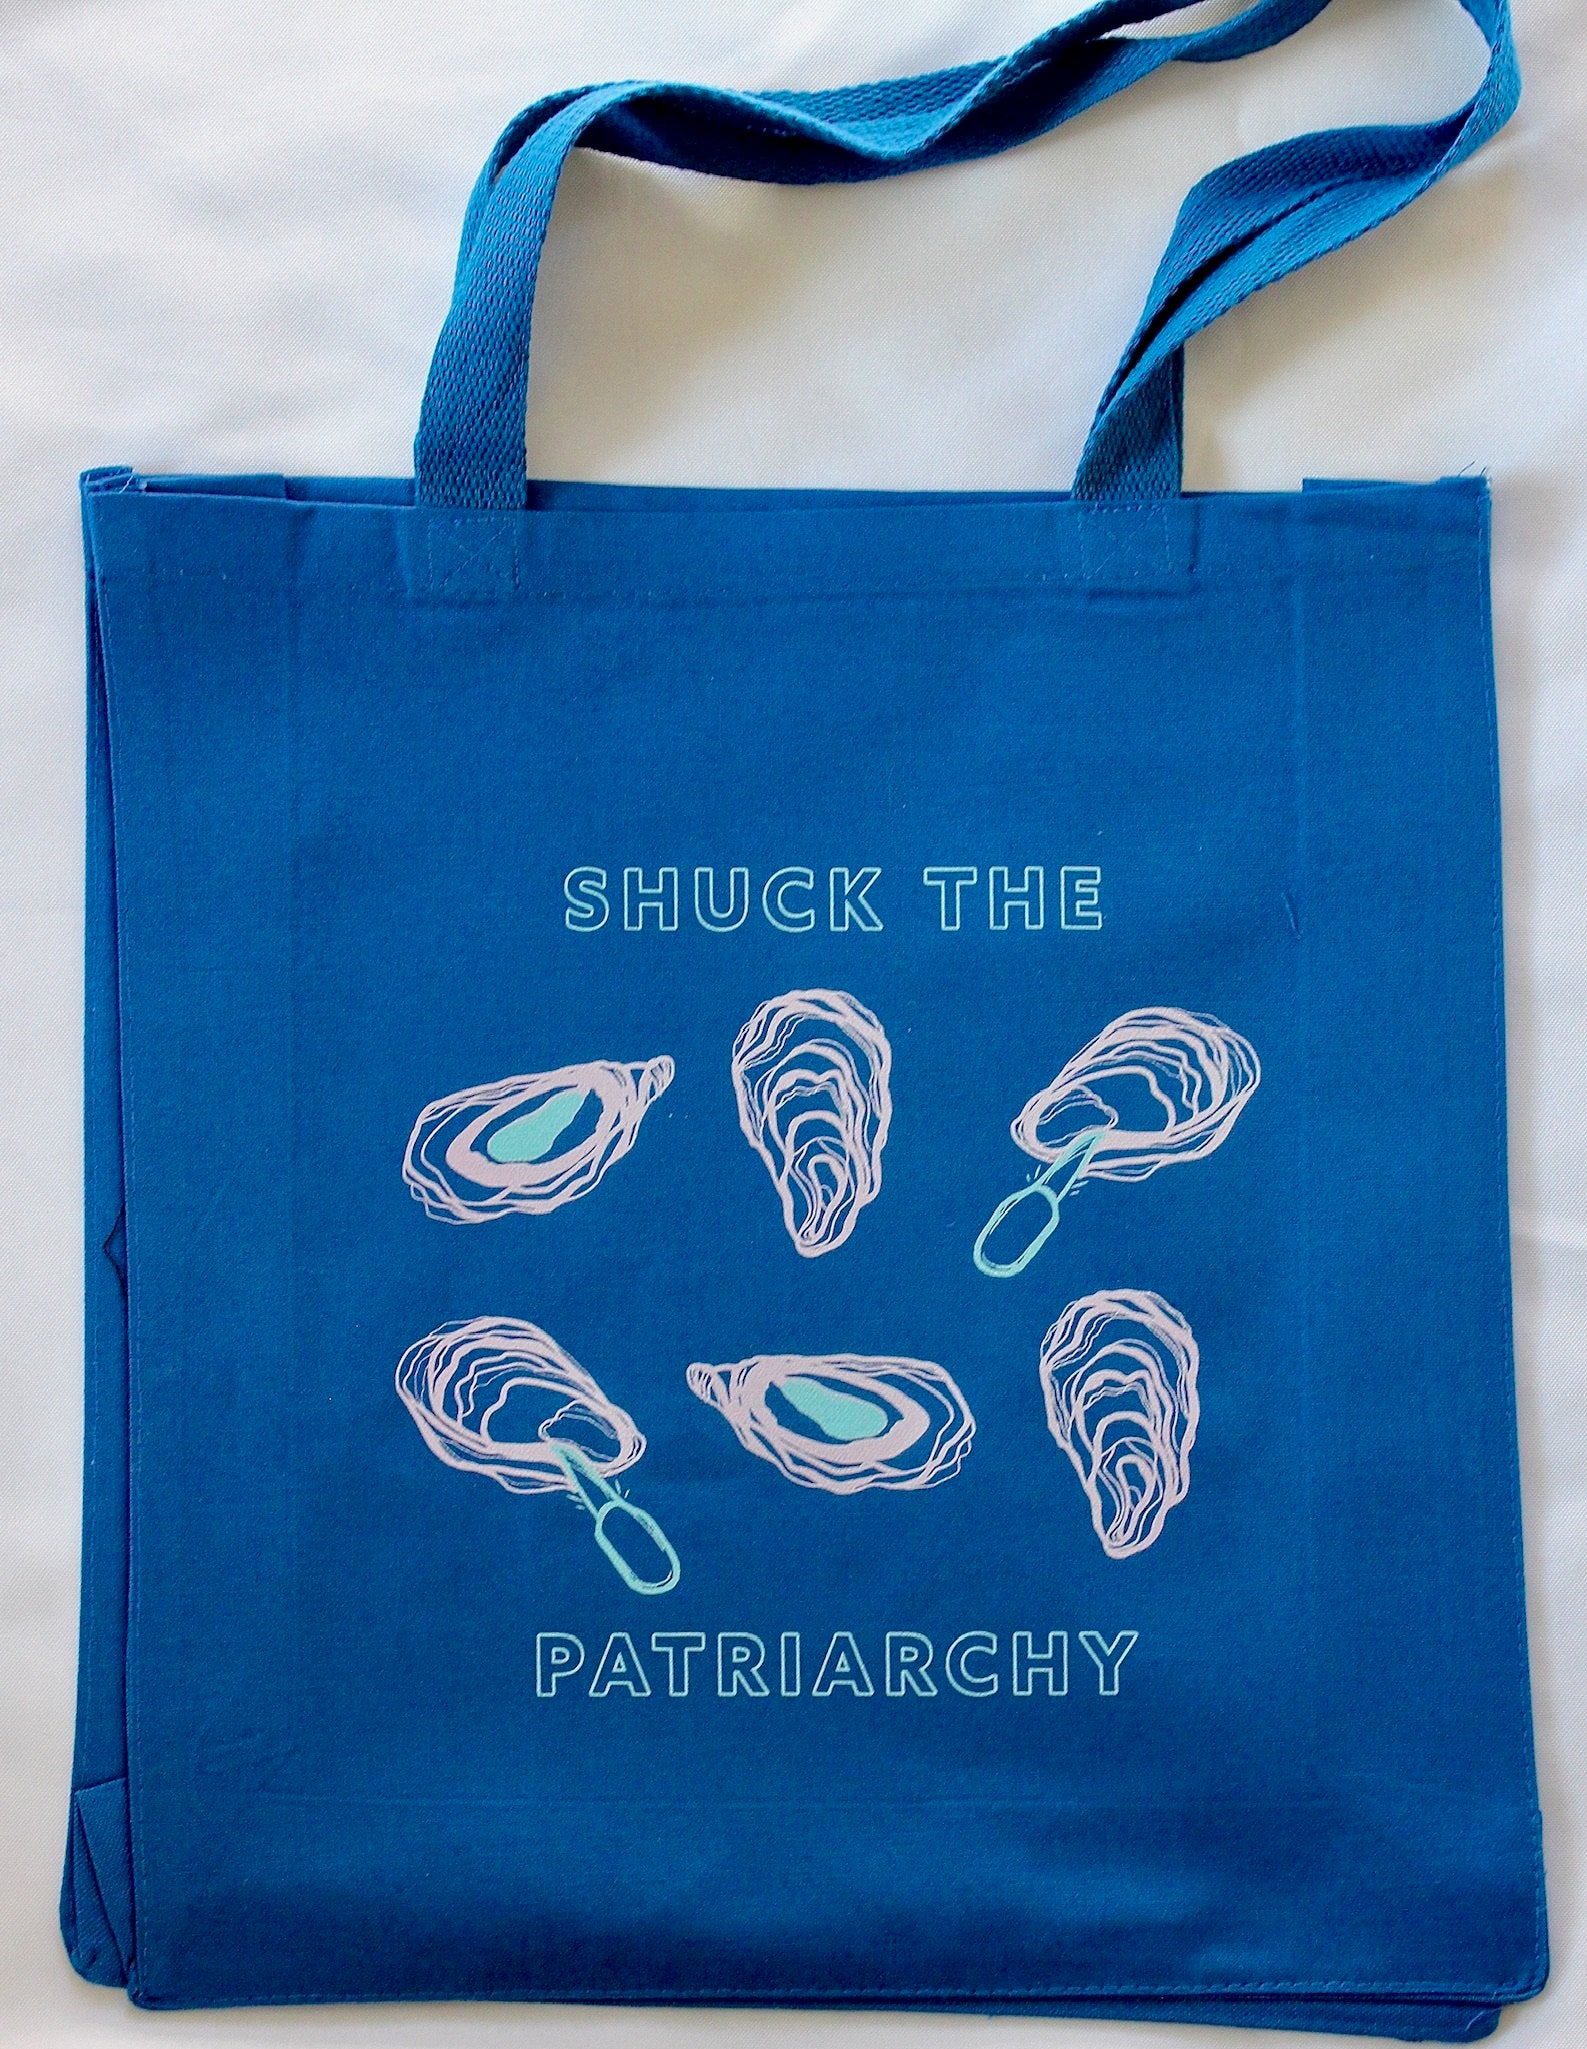 A blue canvas tote reads "Shuck the Patriarchy" in block letters with oyster designs